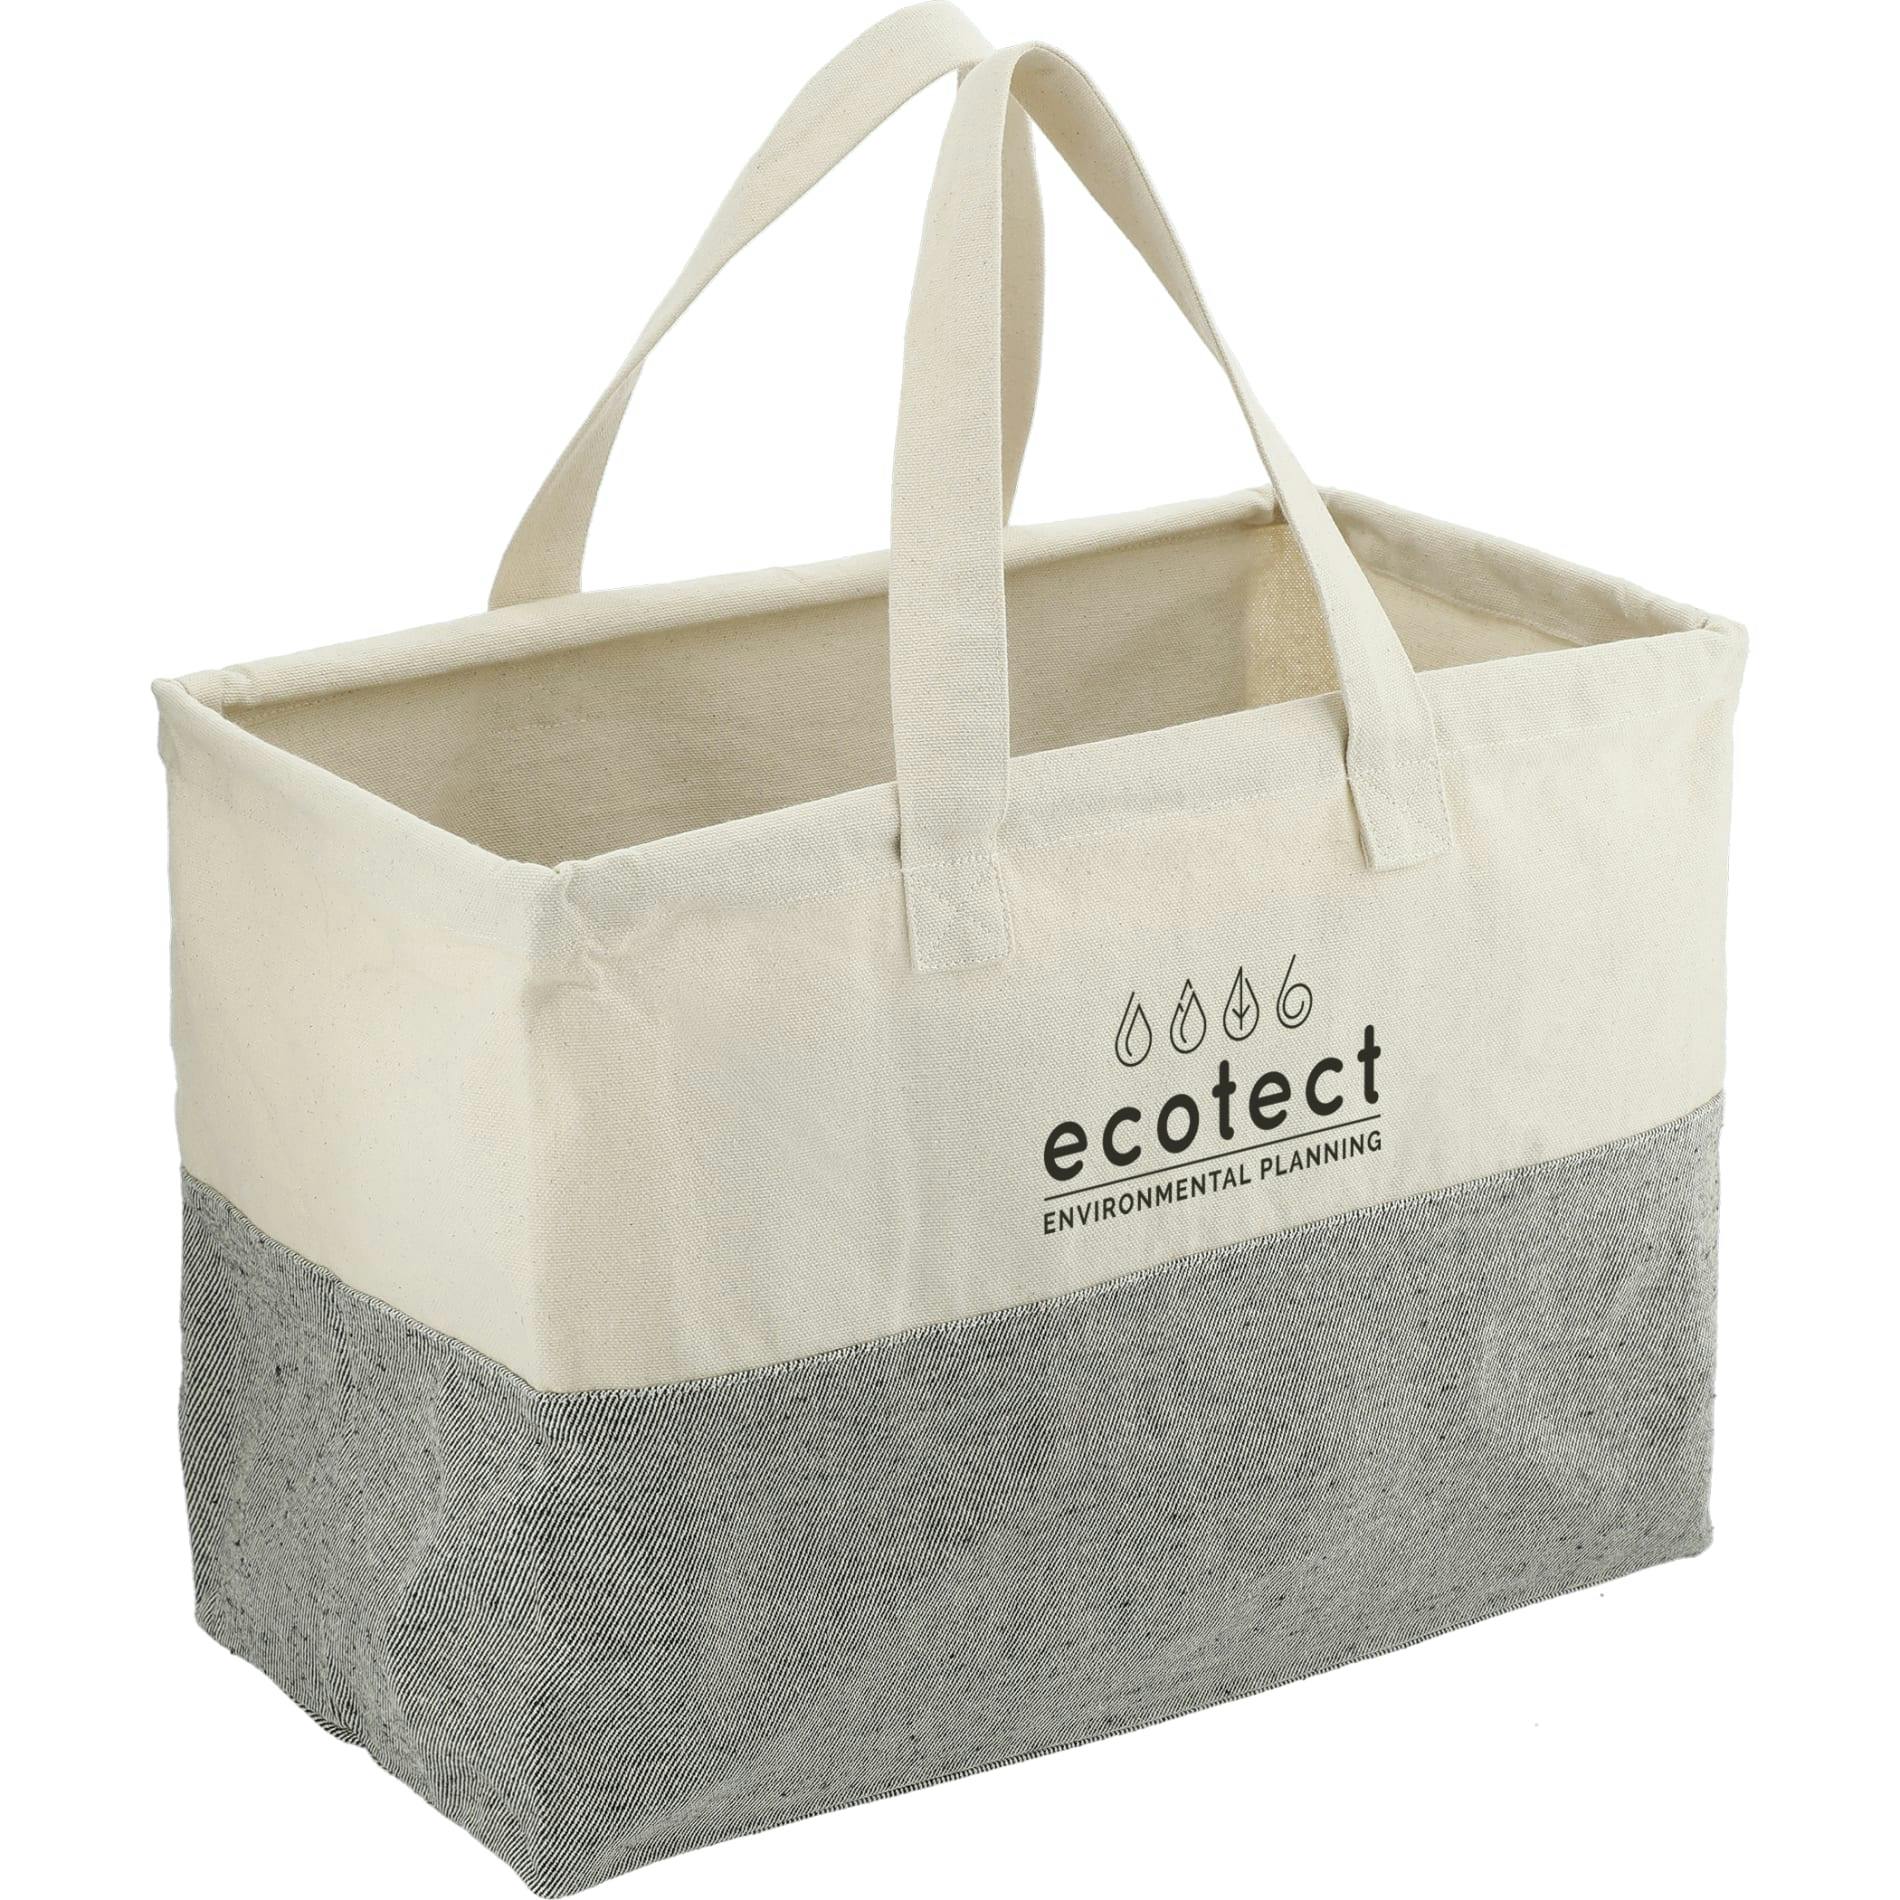 Recycled Cotton Utility Tote - additional Image 2